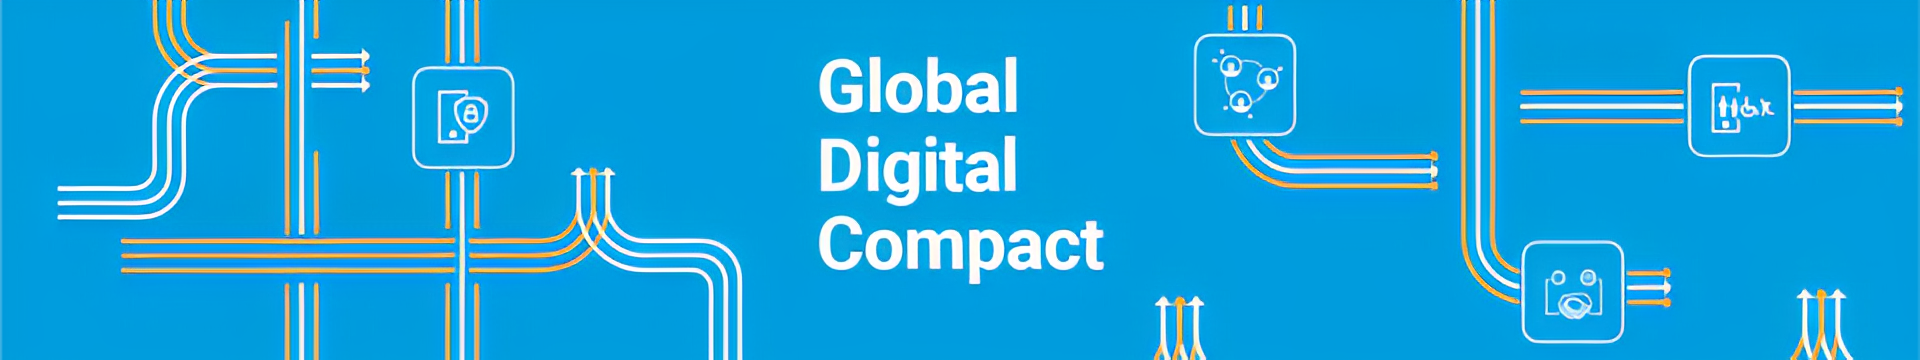 Let’s stay tuned for the Global Digital Compact